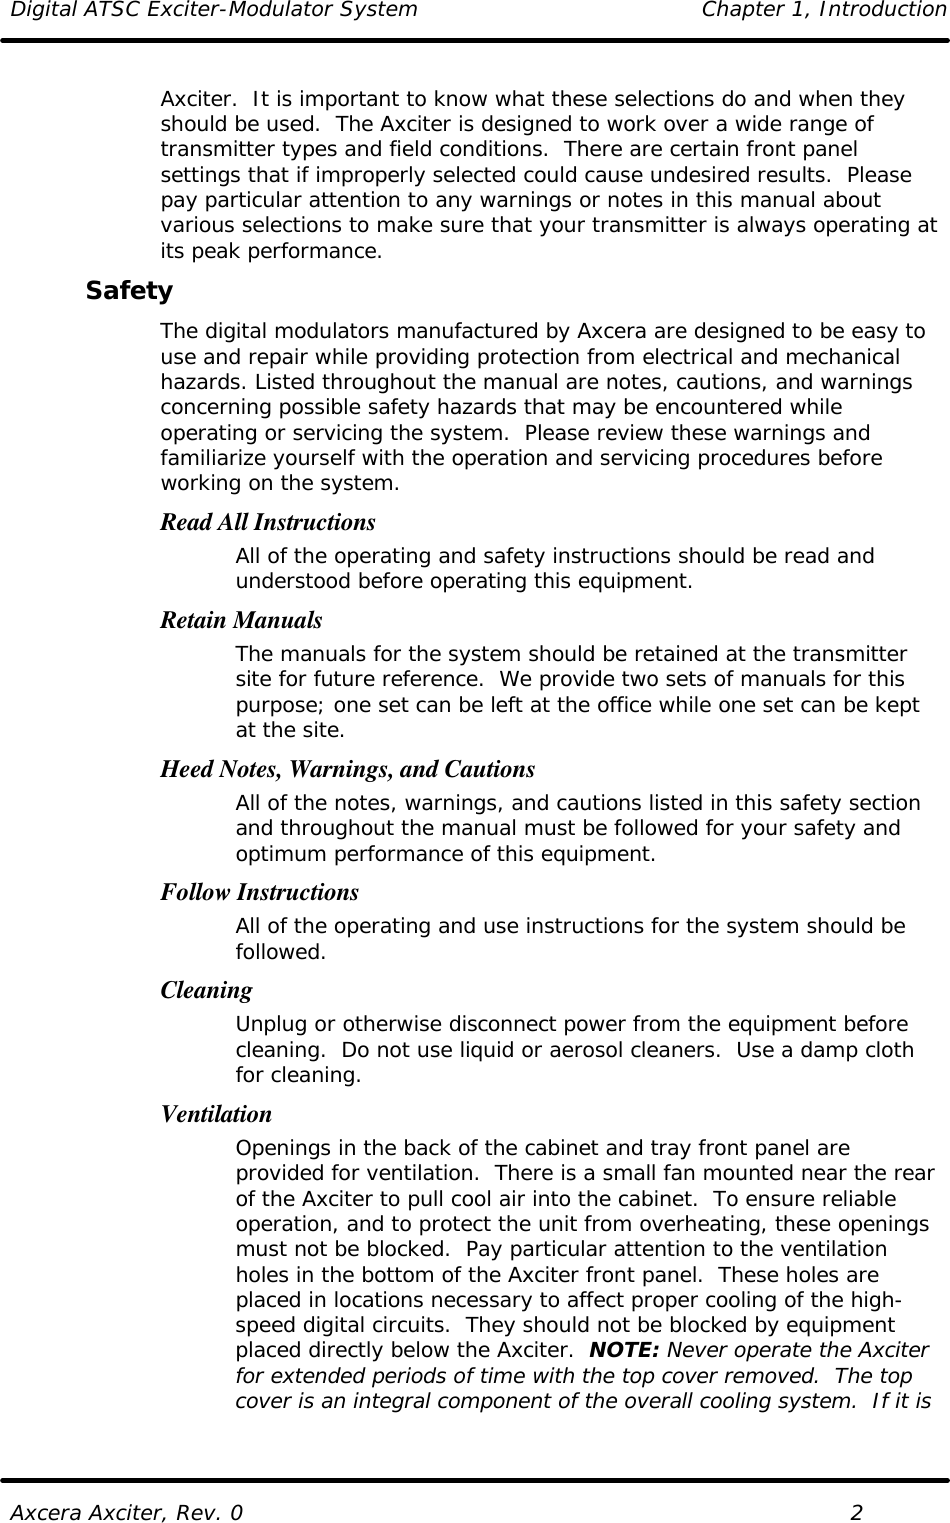 Digital ATSC Exciter-Modulator System Chapter 1, Introduction  Axcera Axciter, Rev. 0    2 Axciter.  It is important to know what these selections do and when they should be used.  The Axciter is designed to work over a wide range of transmitter types and field conditions.  There are certain front panel settings that if improperly selected could cause undesired results.  Please pay particular attention to any warnings or notes in this manual about various selections to make sure that your transmitter is always operating at its peak performance. Safety The digital modulators manufactured by Axcera are designed to be easy to use and repair while providing protection from electrical and mechanical hazards. Listed throughout the manual are notes, cautions, and warnings concerning possible safety hazards that may be encountered while operating or servicing the system.  Please review these warnings and familiarize yourself with the operation and servicing procedures before working on the system. Read All Instructions All of the operating and safety instructions should be read and understood before operating this equipment. Retain Manuals The manuals for the system should be retained at the transmitter site for future reference.  We provide two sets of manuals for this purpose; one set can be left at the office while one set can be kept at the site. Heed Notes, Warnings, and Cautions All of the notes, warnings, and cautions listed in this safety section and throughout the manual must be followed for your safety and optimum performance of this equipment. Follow Instructions All of the operating and use instructions for the system should be followed. Cleaning Unplug or otherwise disconnect power from the equipment before cleaning.  Do not use liquid or aerosol cleaners.  Use a damp cloth for cleaning. Ventilation Openings in the back of the cabinet and tray front panel are provided for ventilation.  There is a small fan mounted near the rear of the Axciter to pull cool air into the cabinet.  To ensure reliable operation, and to protect the unit from overheating, these openings must not be blocked.  Pay particular attention to the ventilation holes in the bottom of the Axciter front panel.  These holes are placed in locations necessary to affect proper cooling of the high-speed digital circuits.  They should not be blocked by equipment placed directly below the Axciter.  NOTE: Never operate the Axciter for extended periods of time with the top cover removed.  The top cover is an integral component of the overall cooling system.  If it is 